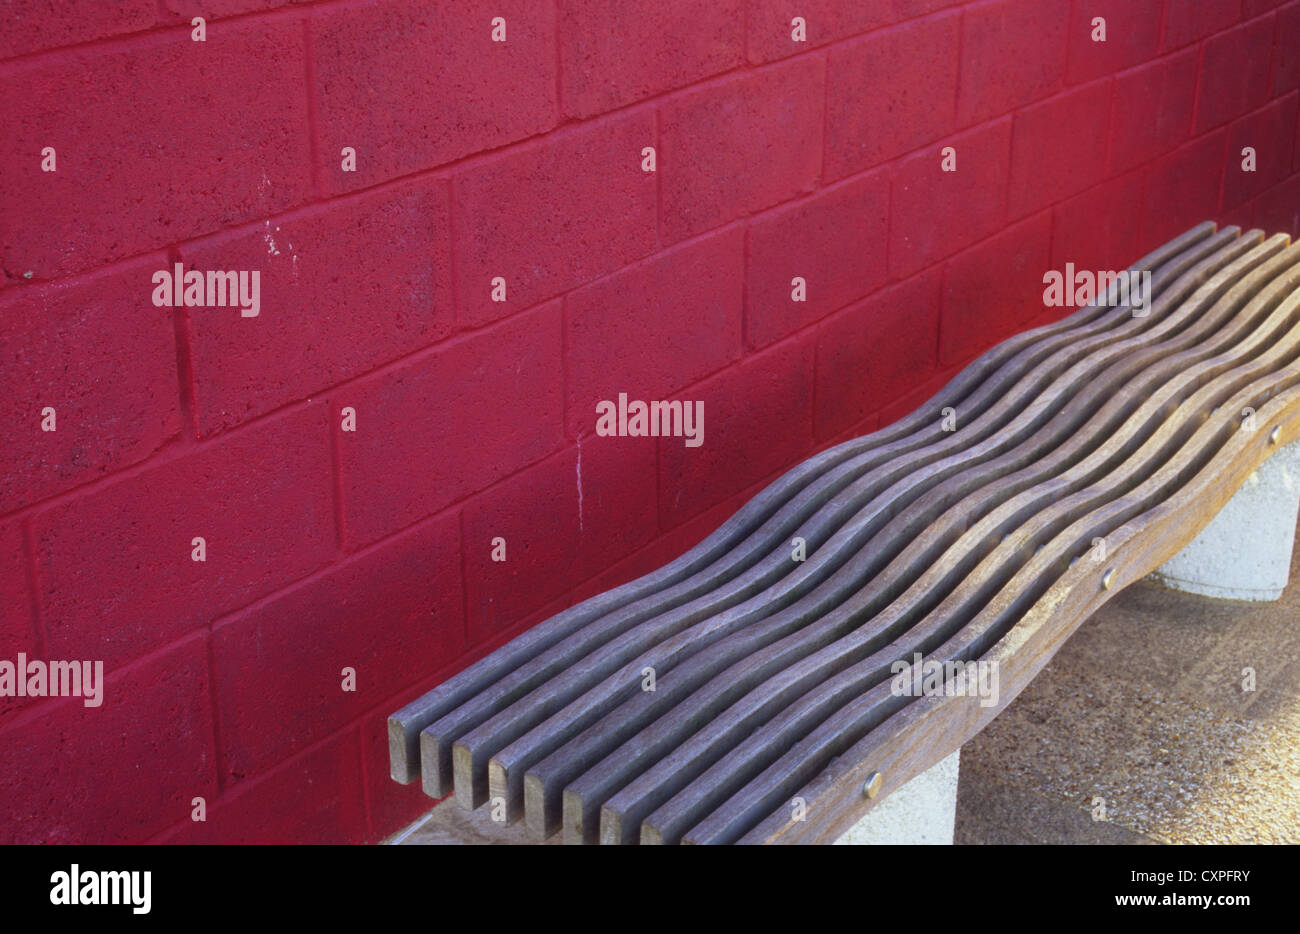 Wooden bench with wavy seat to deter sleepers in front of breeze block wall painted crimson red Stock Photo